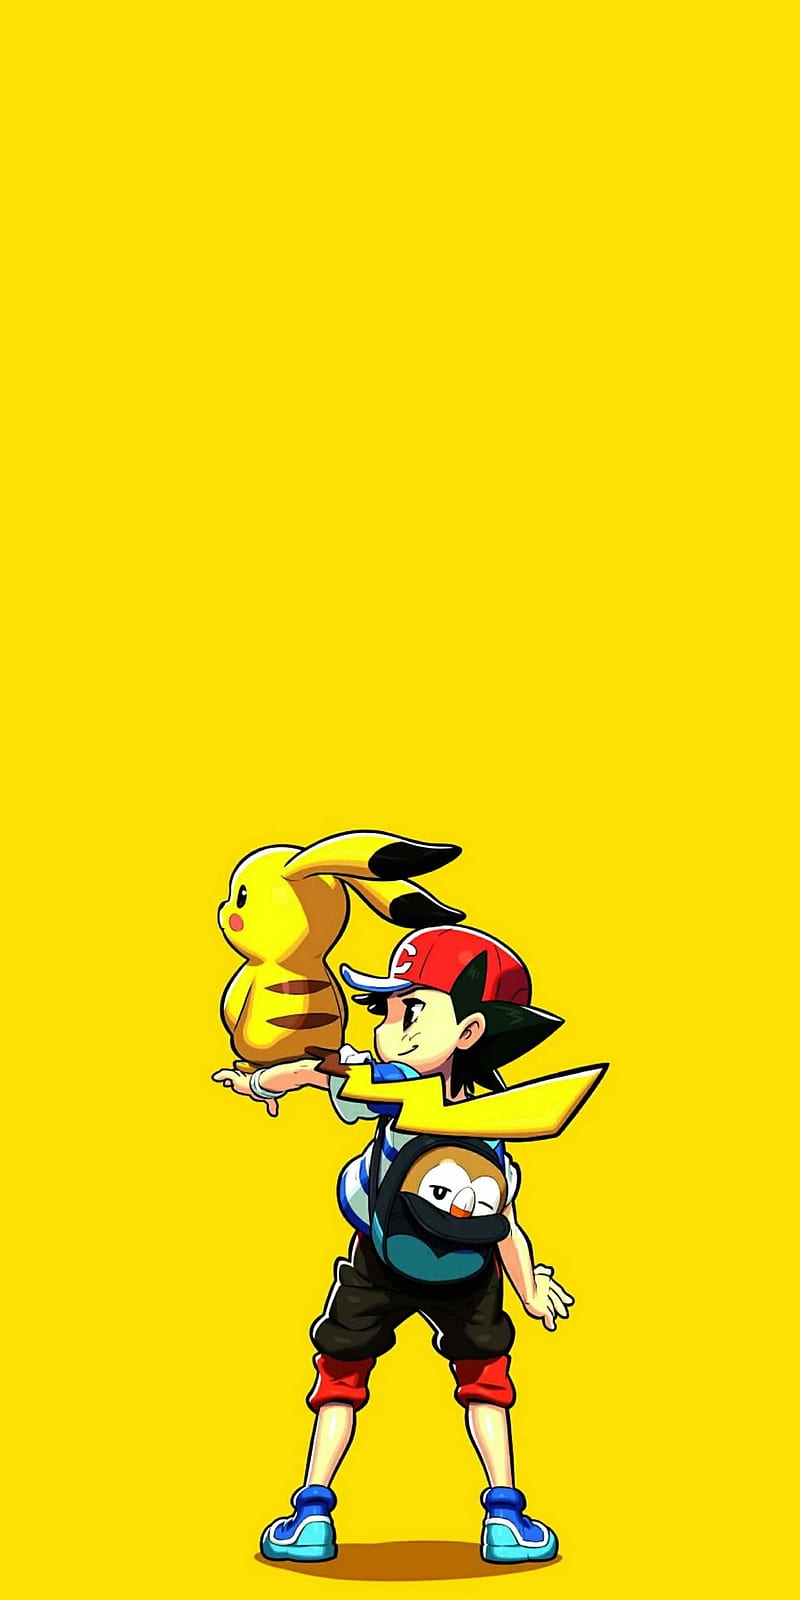 Electric Cutie Pikachu Wallpaper Collection : Pikachu Sleeping Mode - Idea  Wallpapers , iPhone Wallpapers,Color Schemes